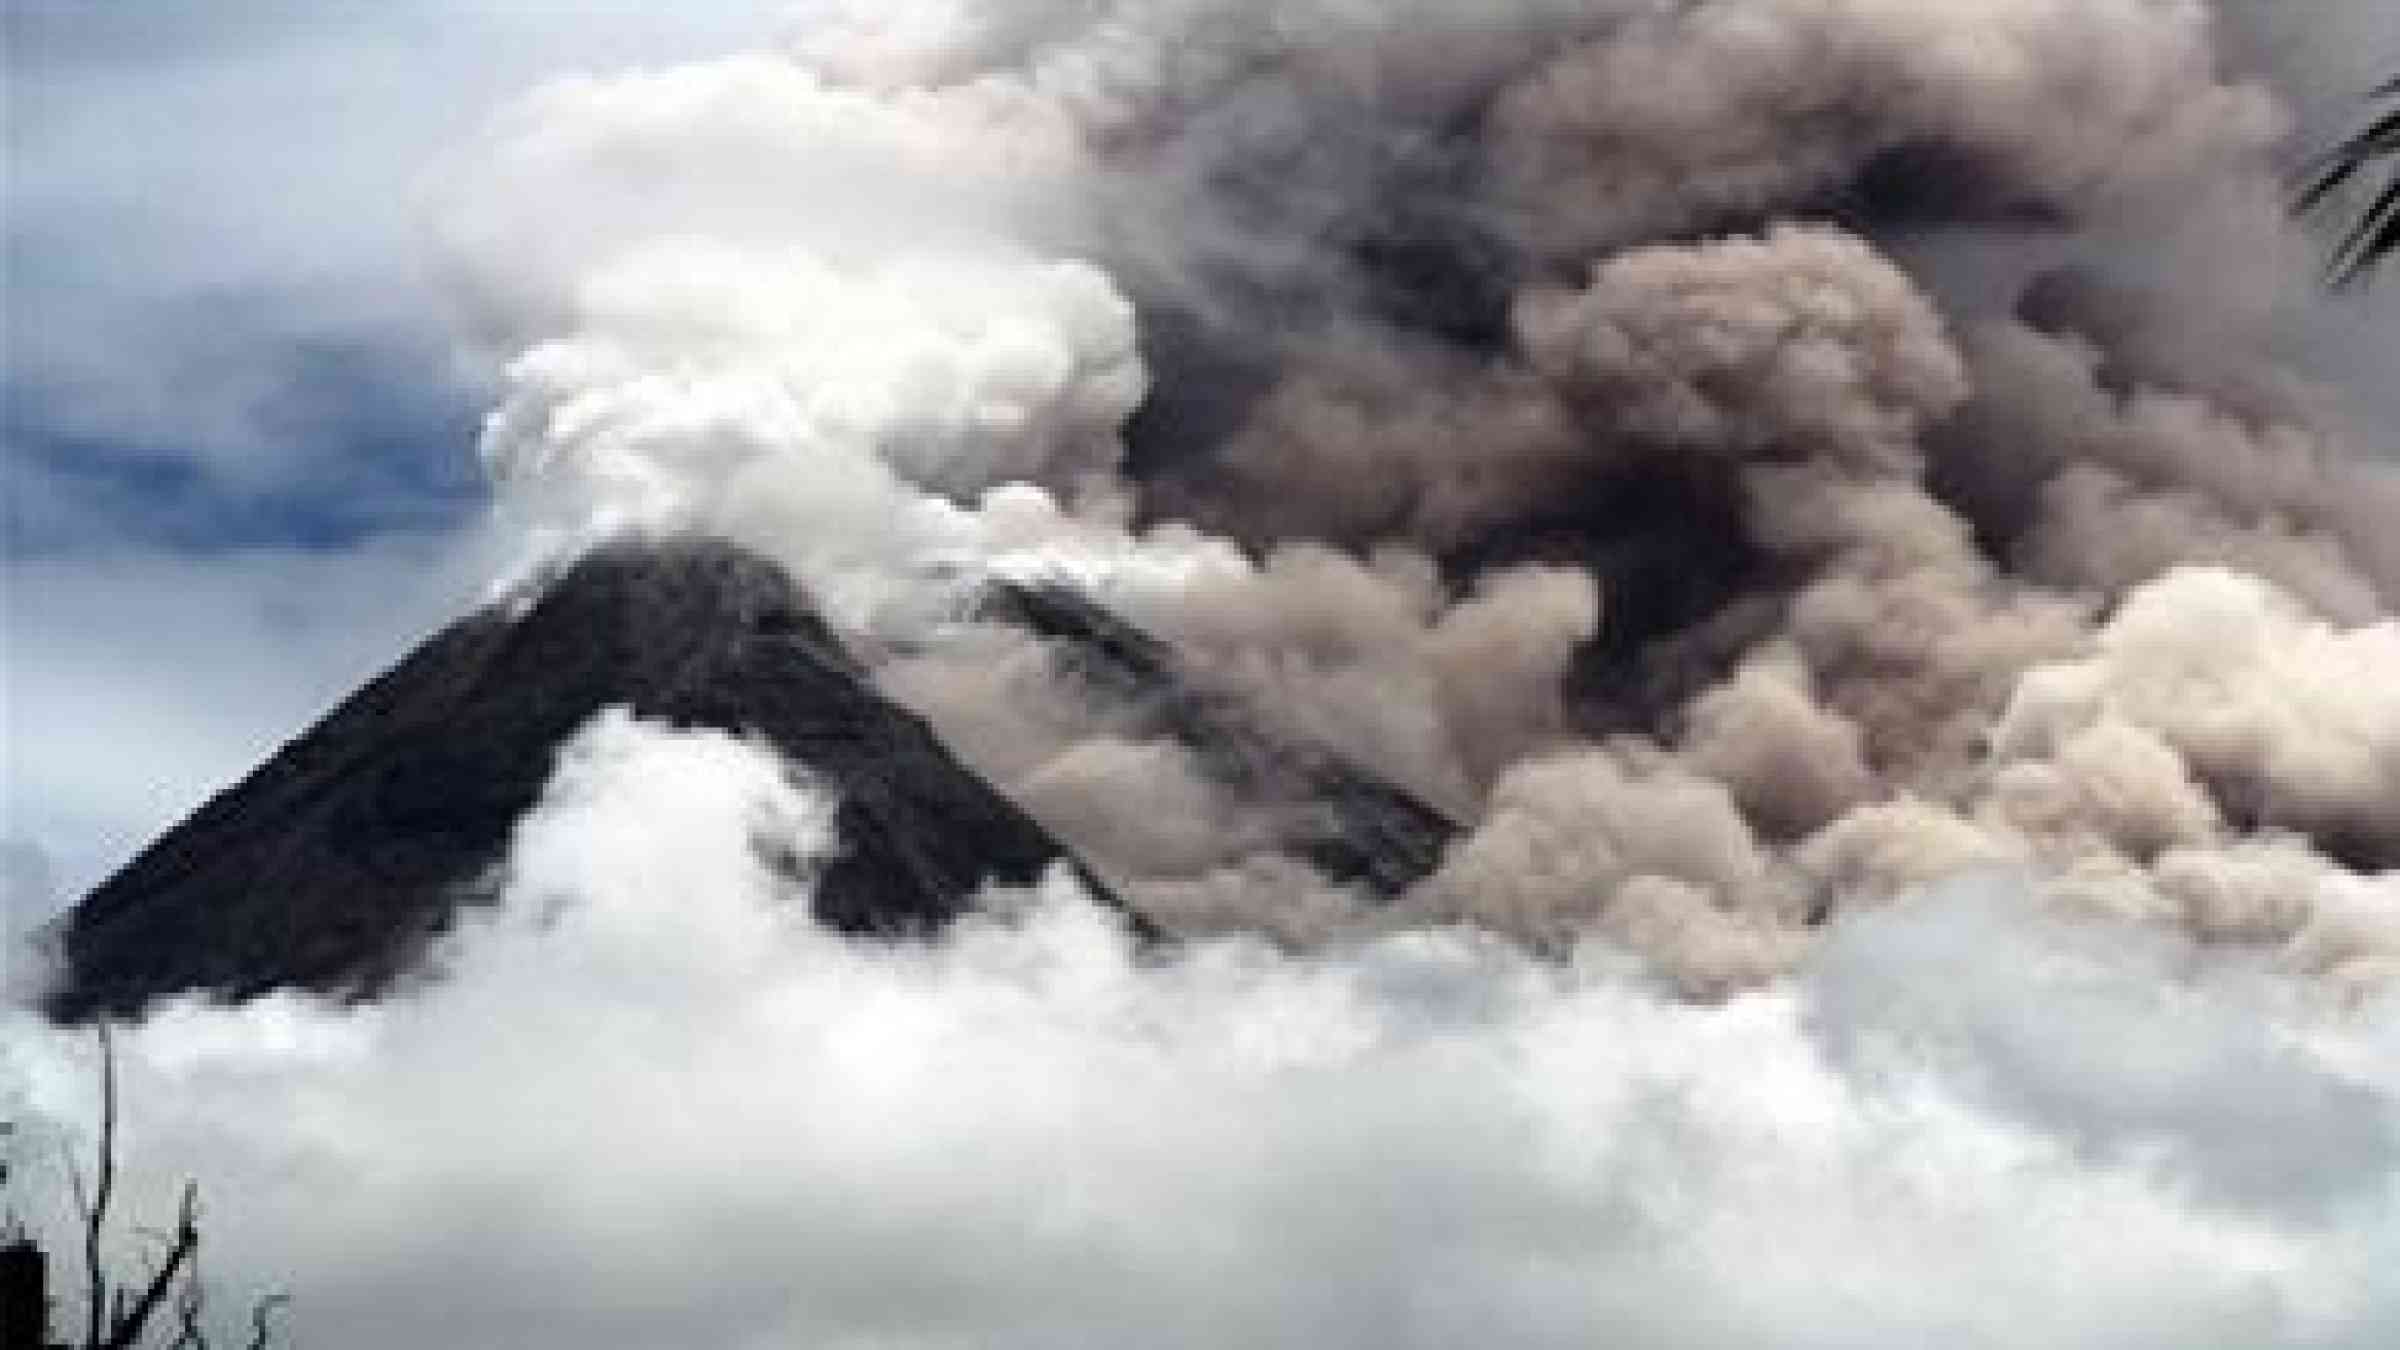 by Pelang Merah Indonesia http://www.irinnews.org/report/100019/reducing-the-volcano-risk-in-indonesia